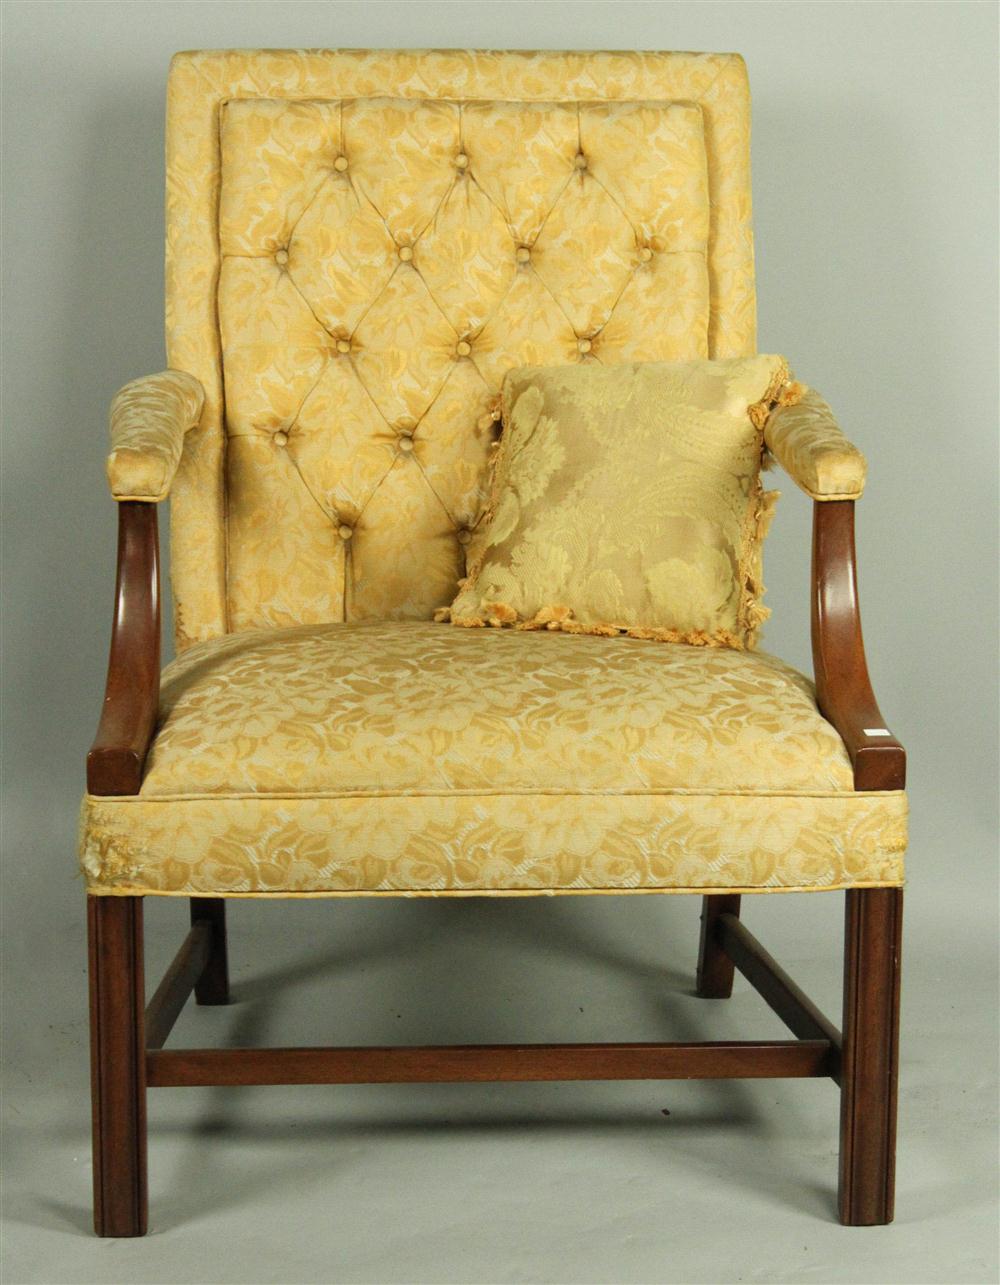 GEORGIAN STYLE OPEN ARM CHAIR WITH